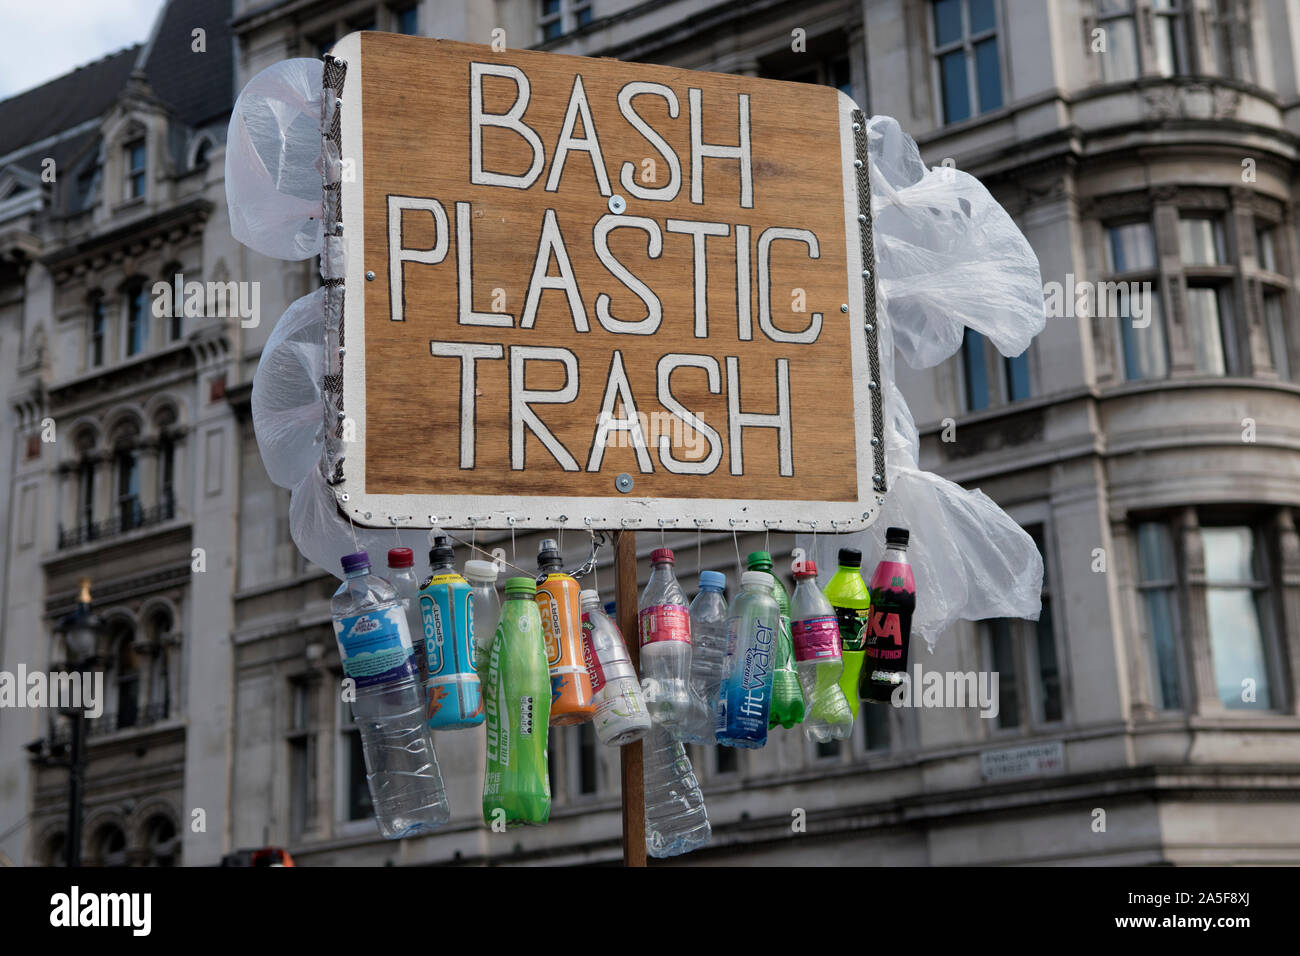 https://c8.alamy.com/comp/2A5F8XJ/plastic-protest-london-uk-2019-robert-unbranded-demonstrates-in-westminster-holding-up-a-bash-plastic-trash-poster-sign-with-one-use-plastic-bottles-and-plastic-bags-hanging-from-it-england-2010s-homer-sykes-2A5F8XJ.jpg